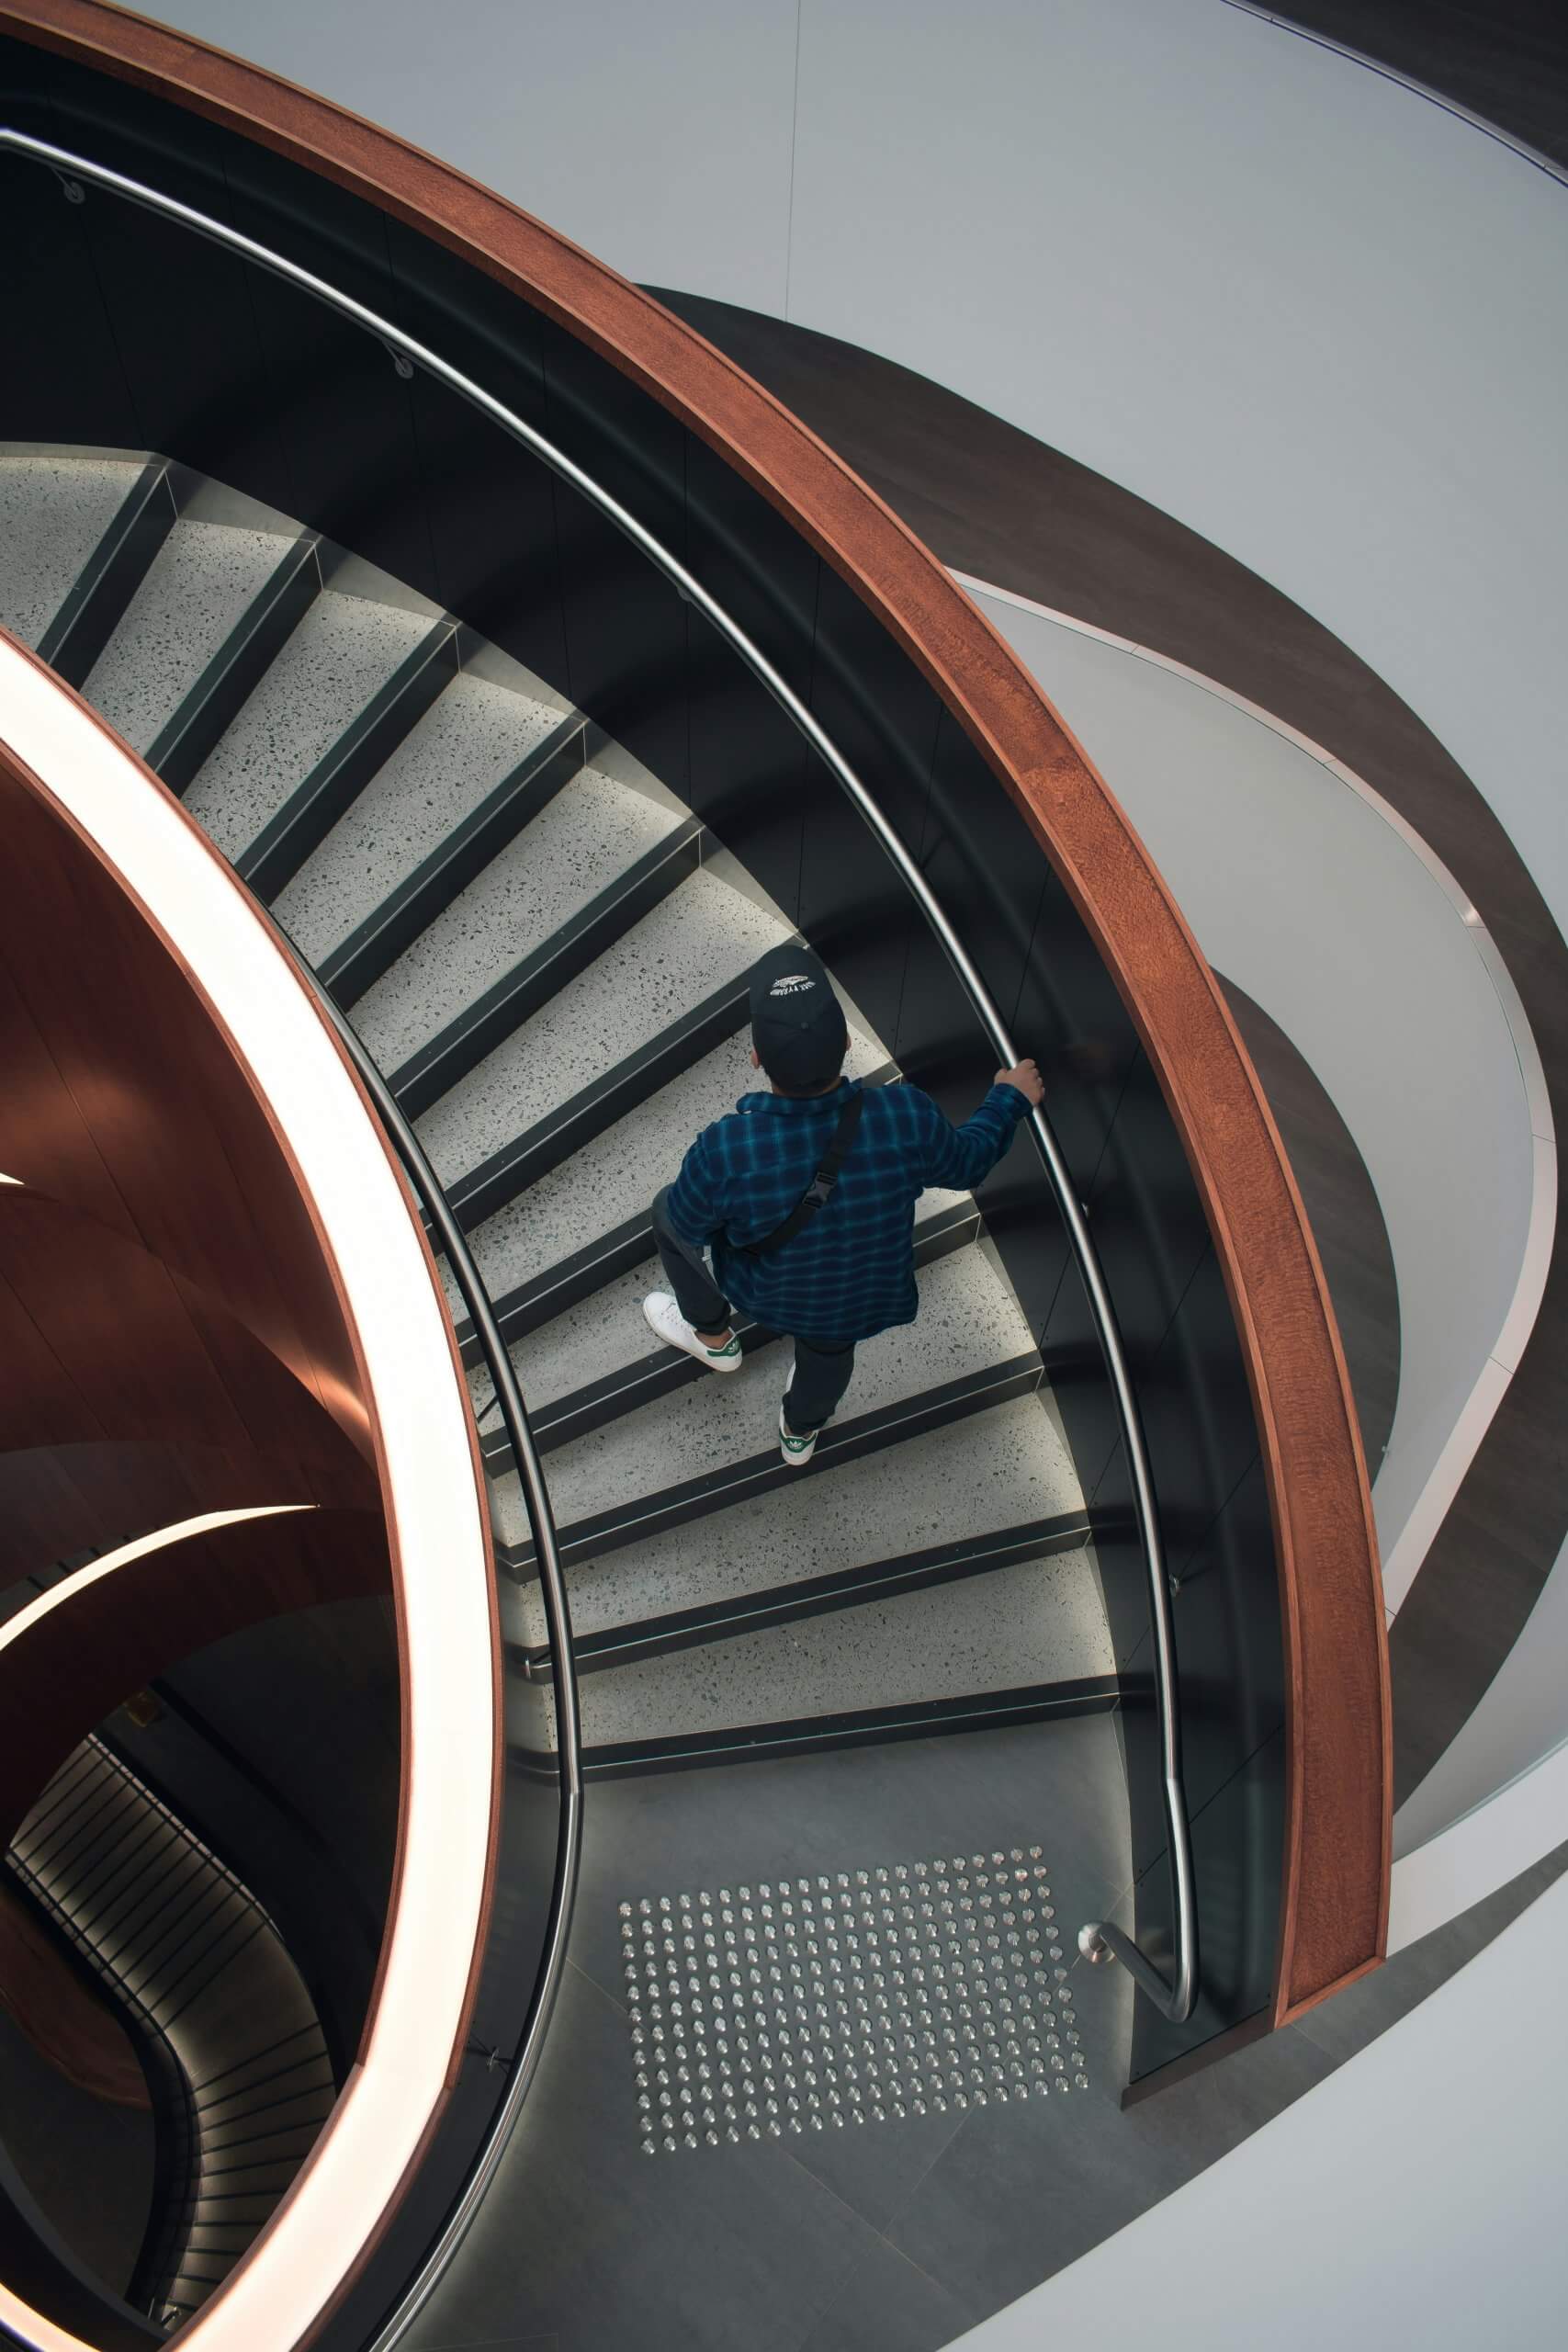 A photo of a man in a blue plaid shirt walking up a modern curved staircase.